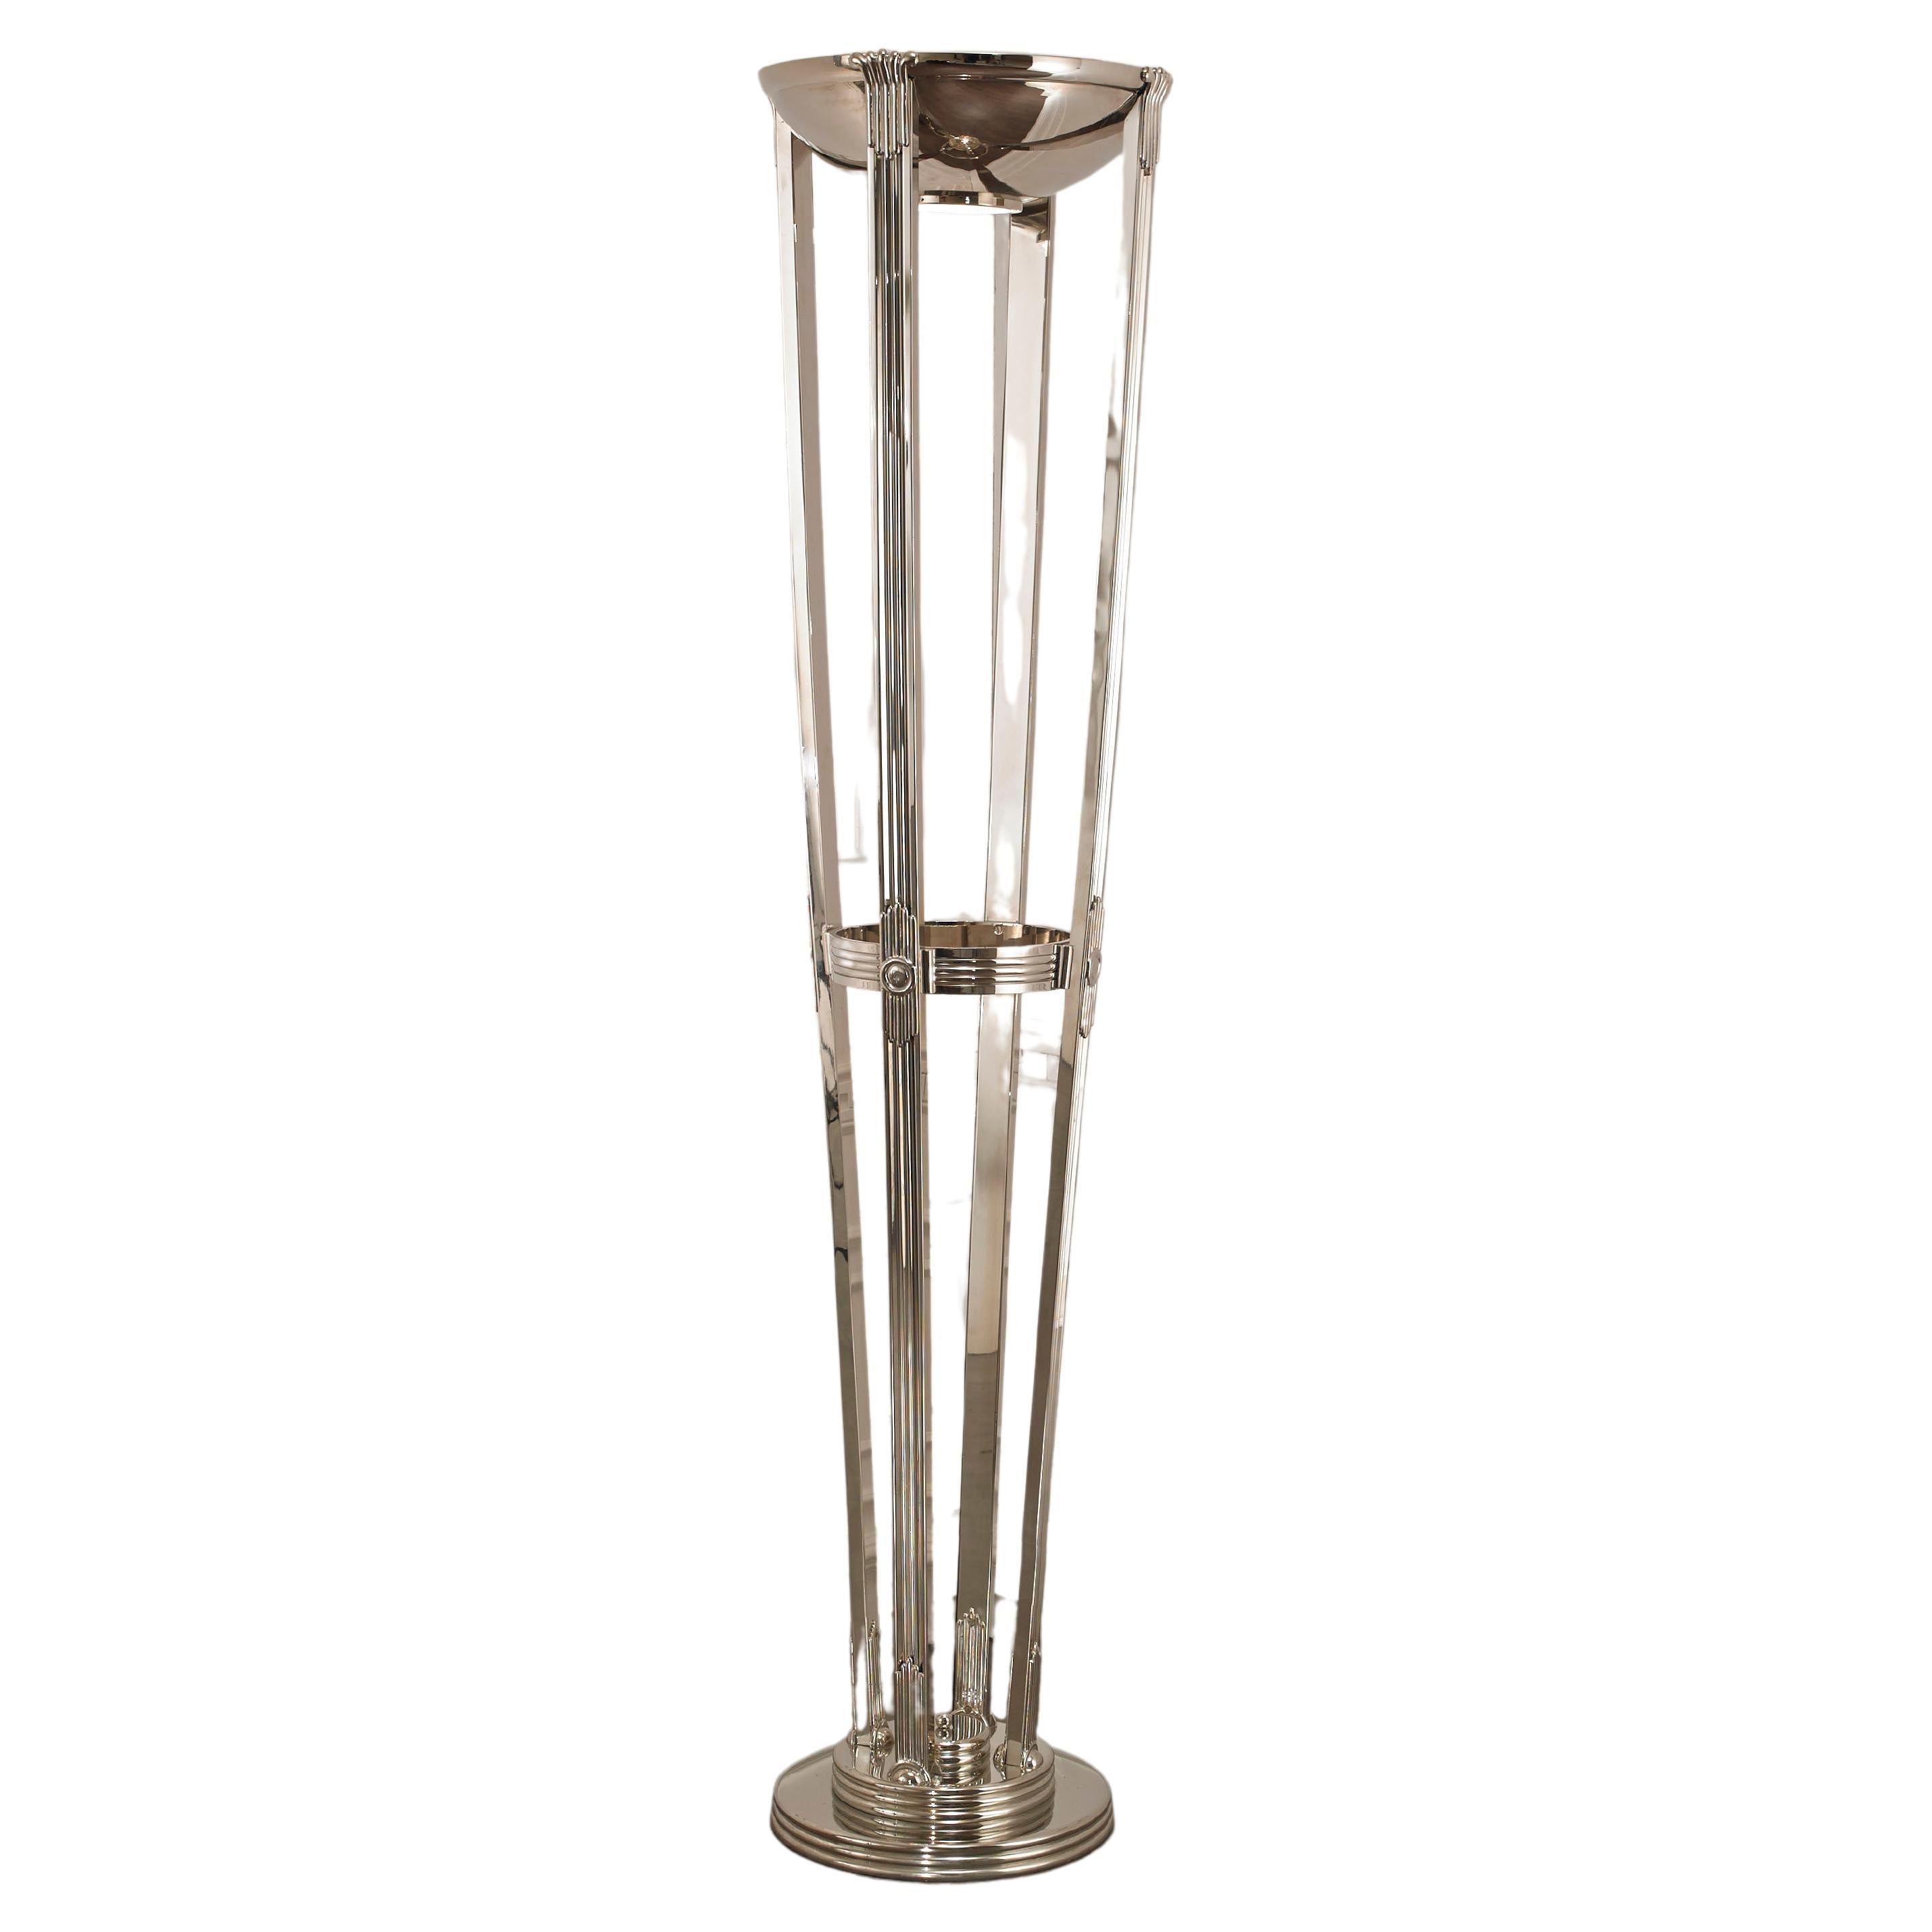 Art Deco Modernist Floor Lamp with Nickel Finish For Sale